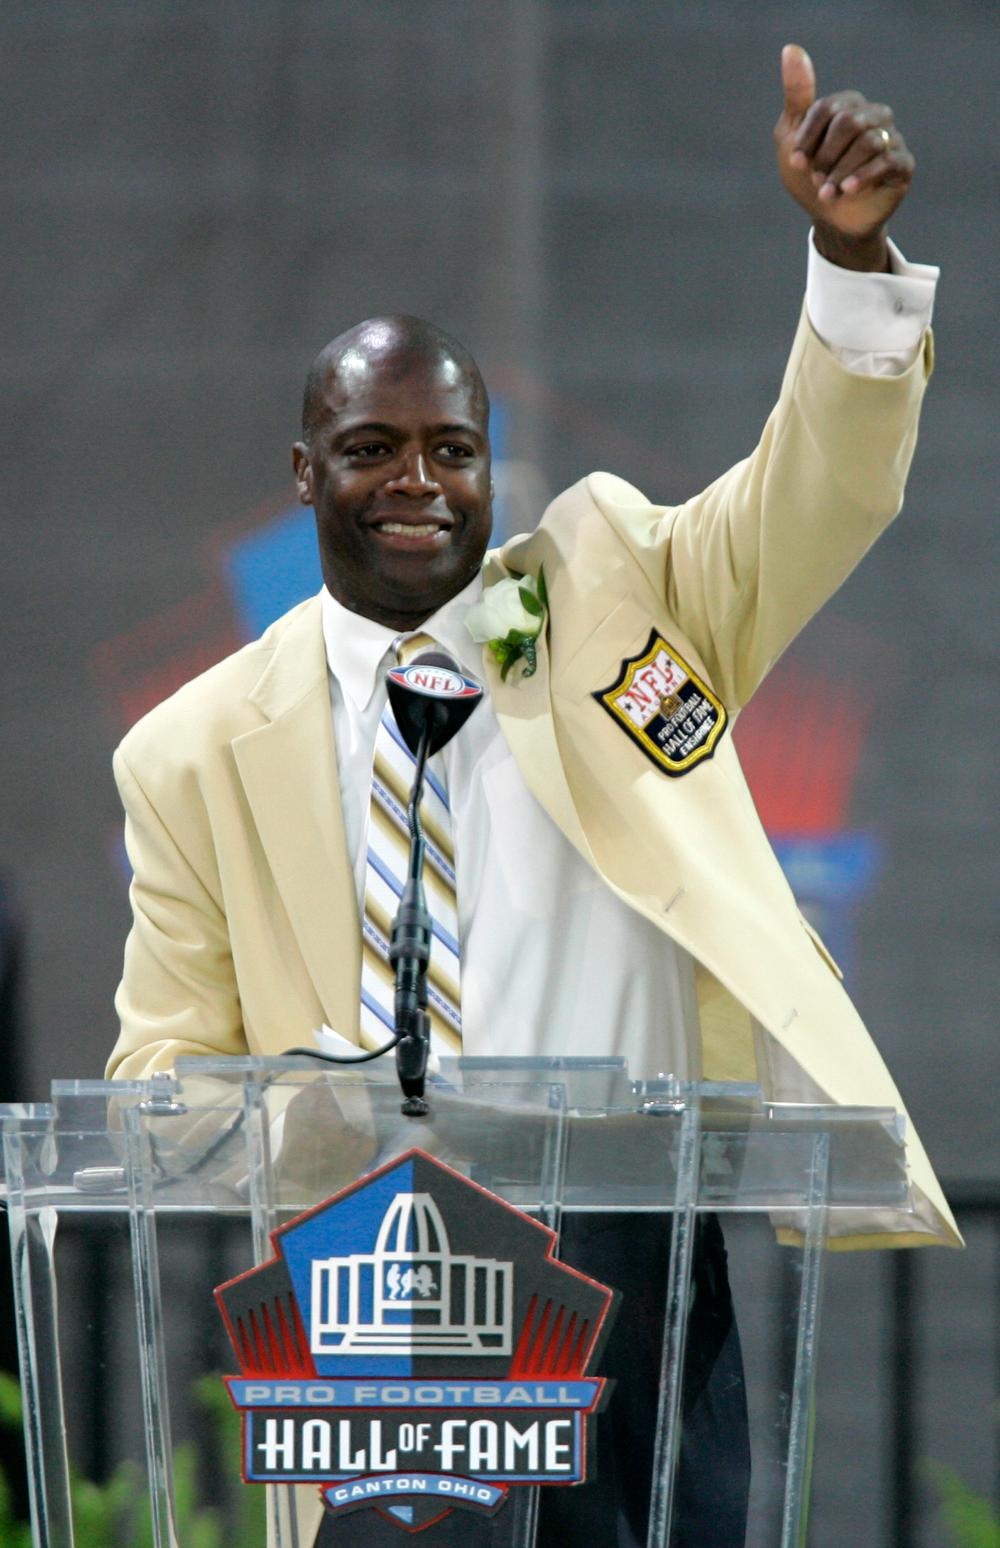 Darrell Green is inducted into the NFL Hall of Fame. Green spent his entire 20-year NLF career playing for the Redskins. (Photo courtesy The Associated Press.)